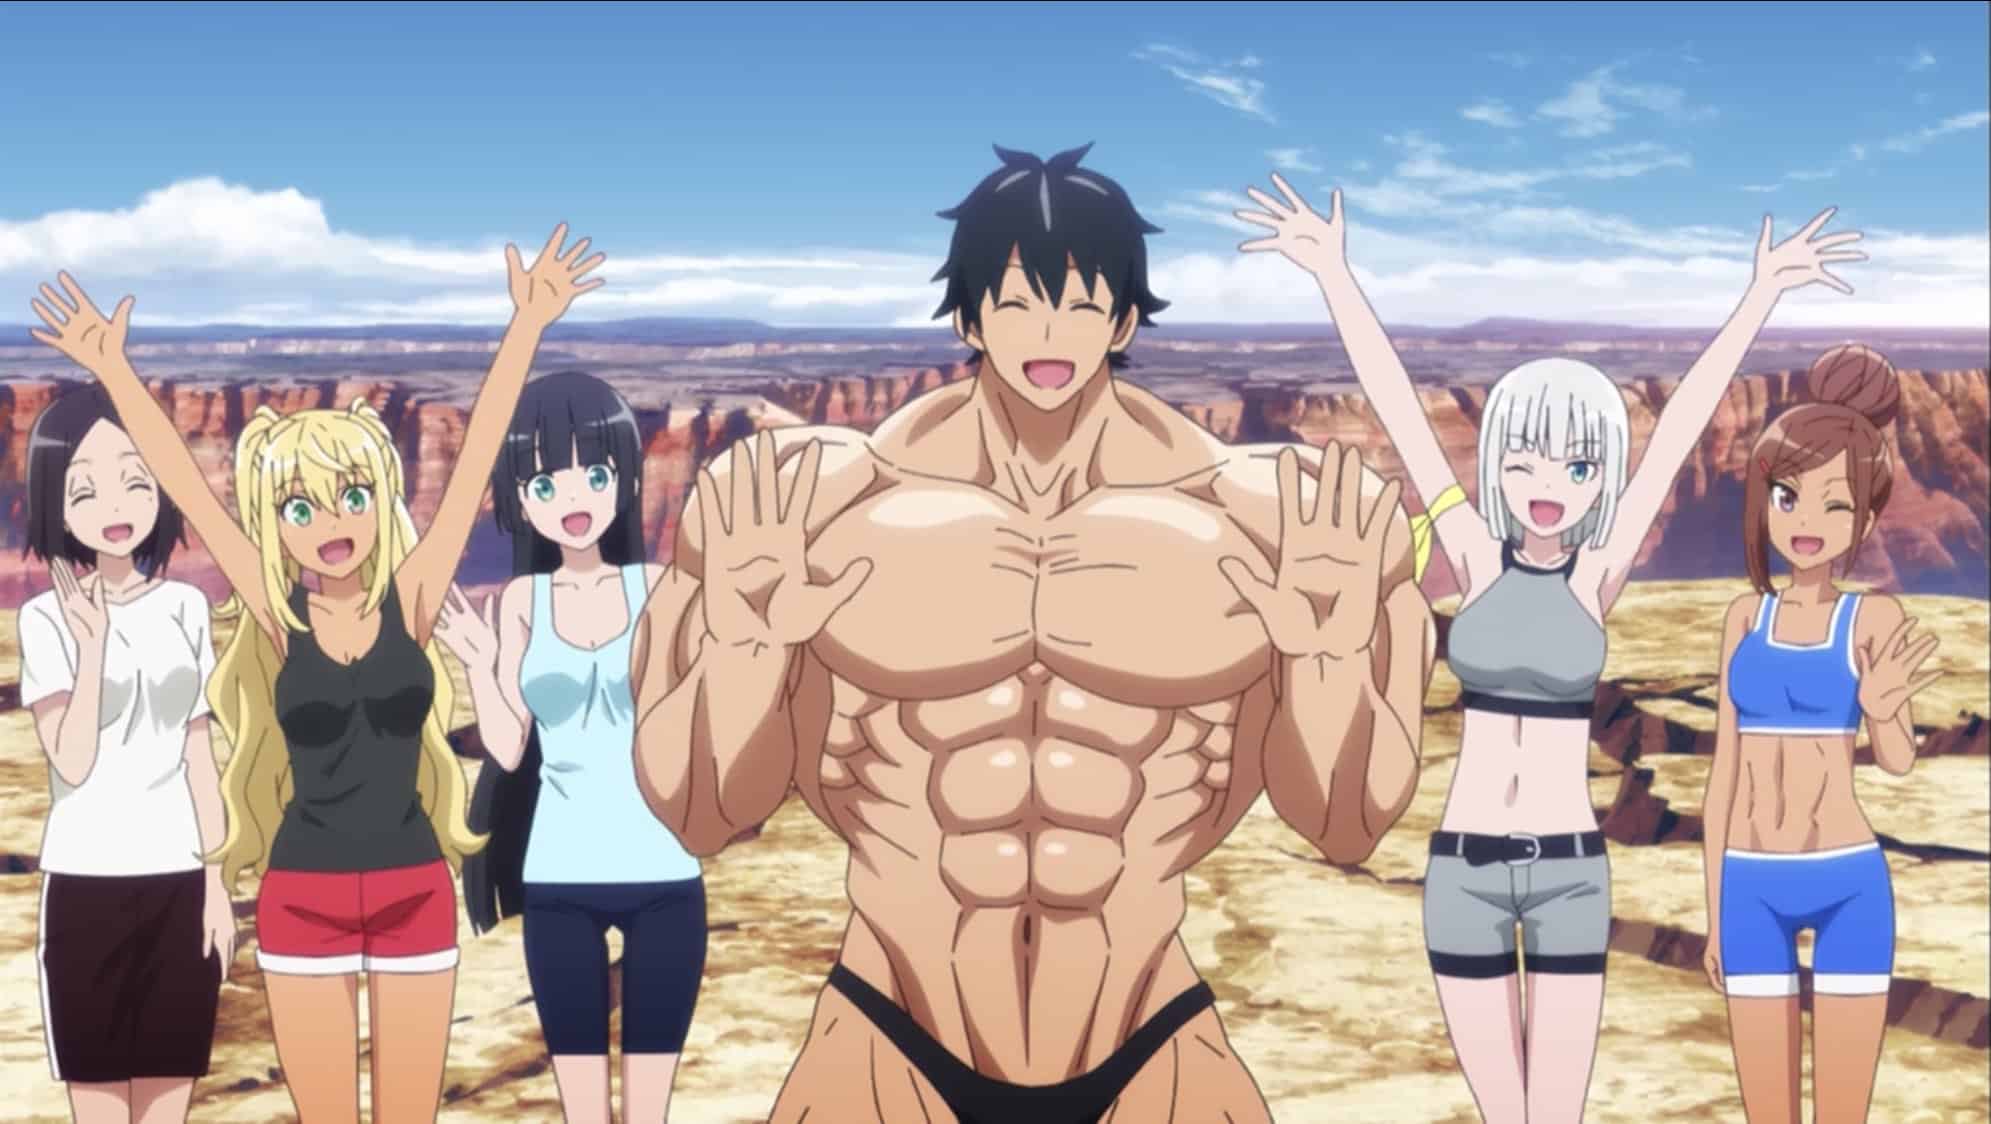 Massively shredded man with a small cute face surrounded by anime gym girls